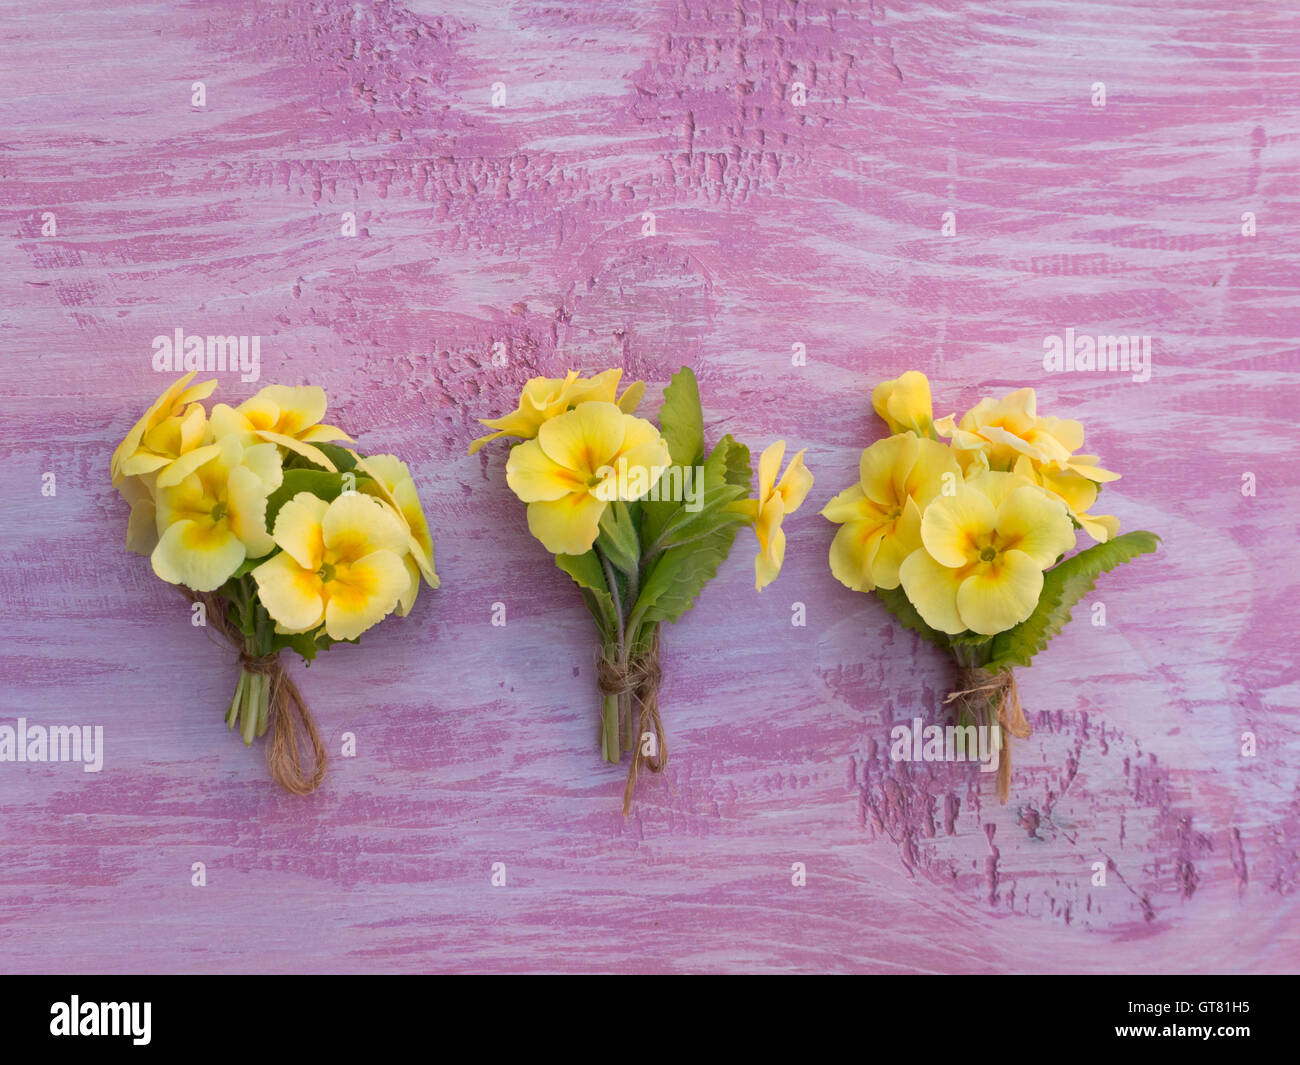 Three yellow primrose flowers bouquets tied with jute rope on the violet painted wooden board Stock Photo